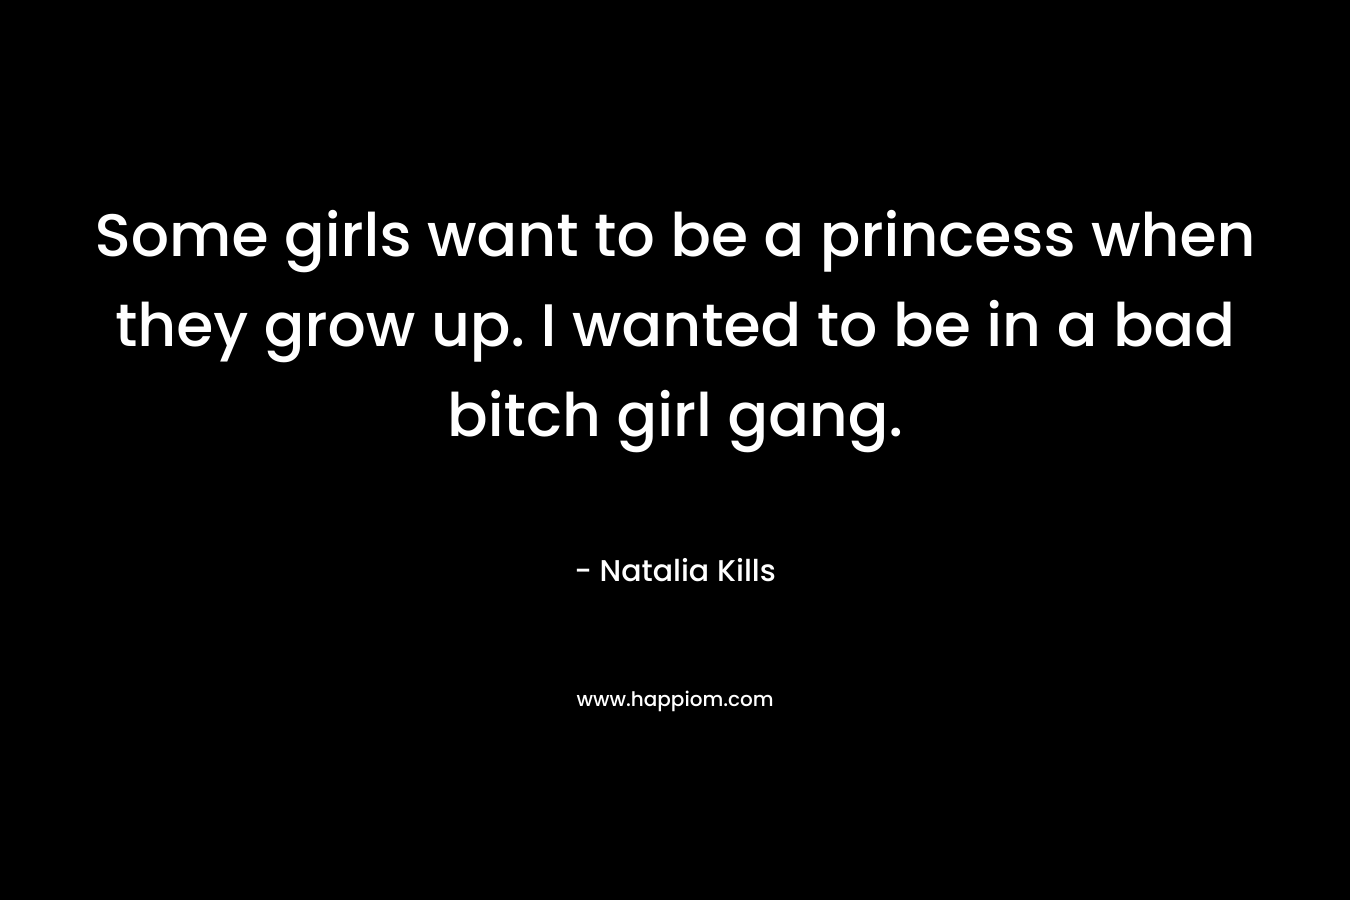 Some girls want to be a princess when they grow up. I wanted to be in a bad bitch girl gang.